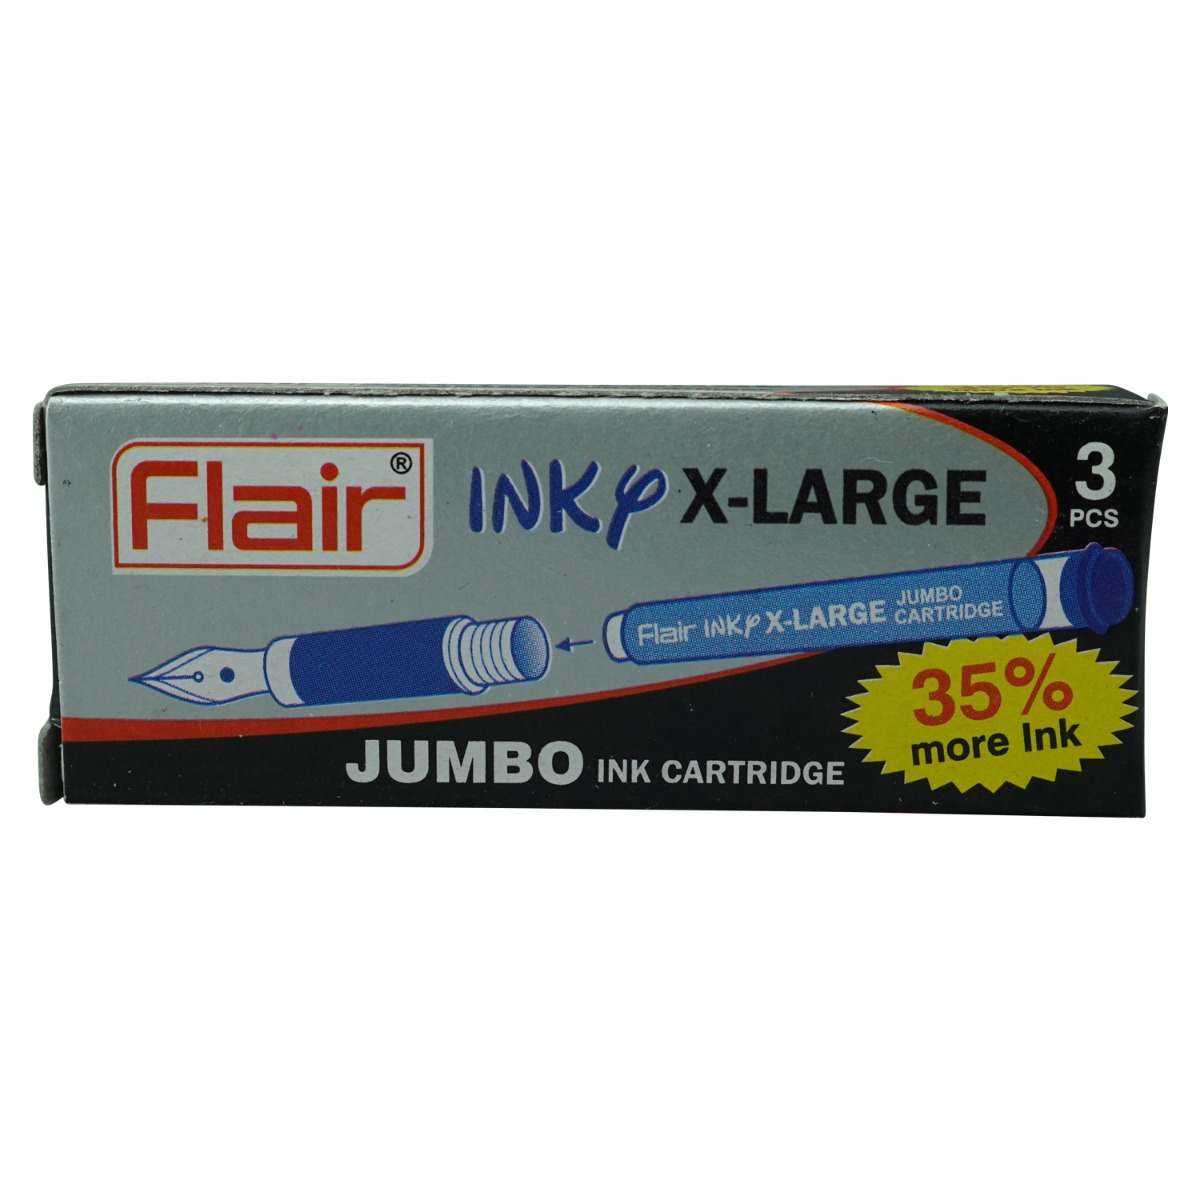 Flair Inky X-Large Model:70556 Black color Ink Catridge 3 Piece in X-Large